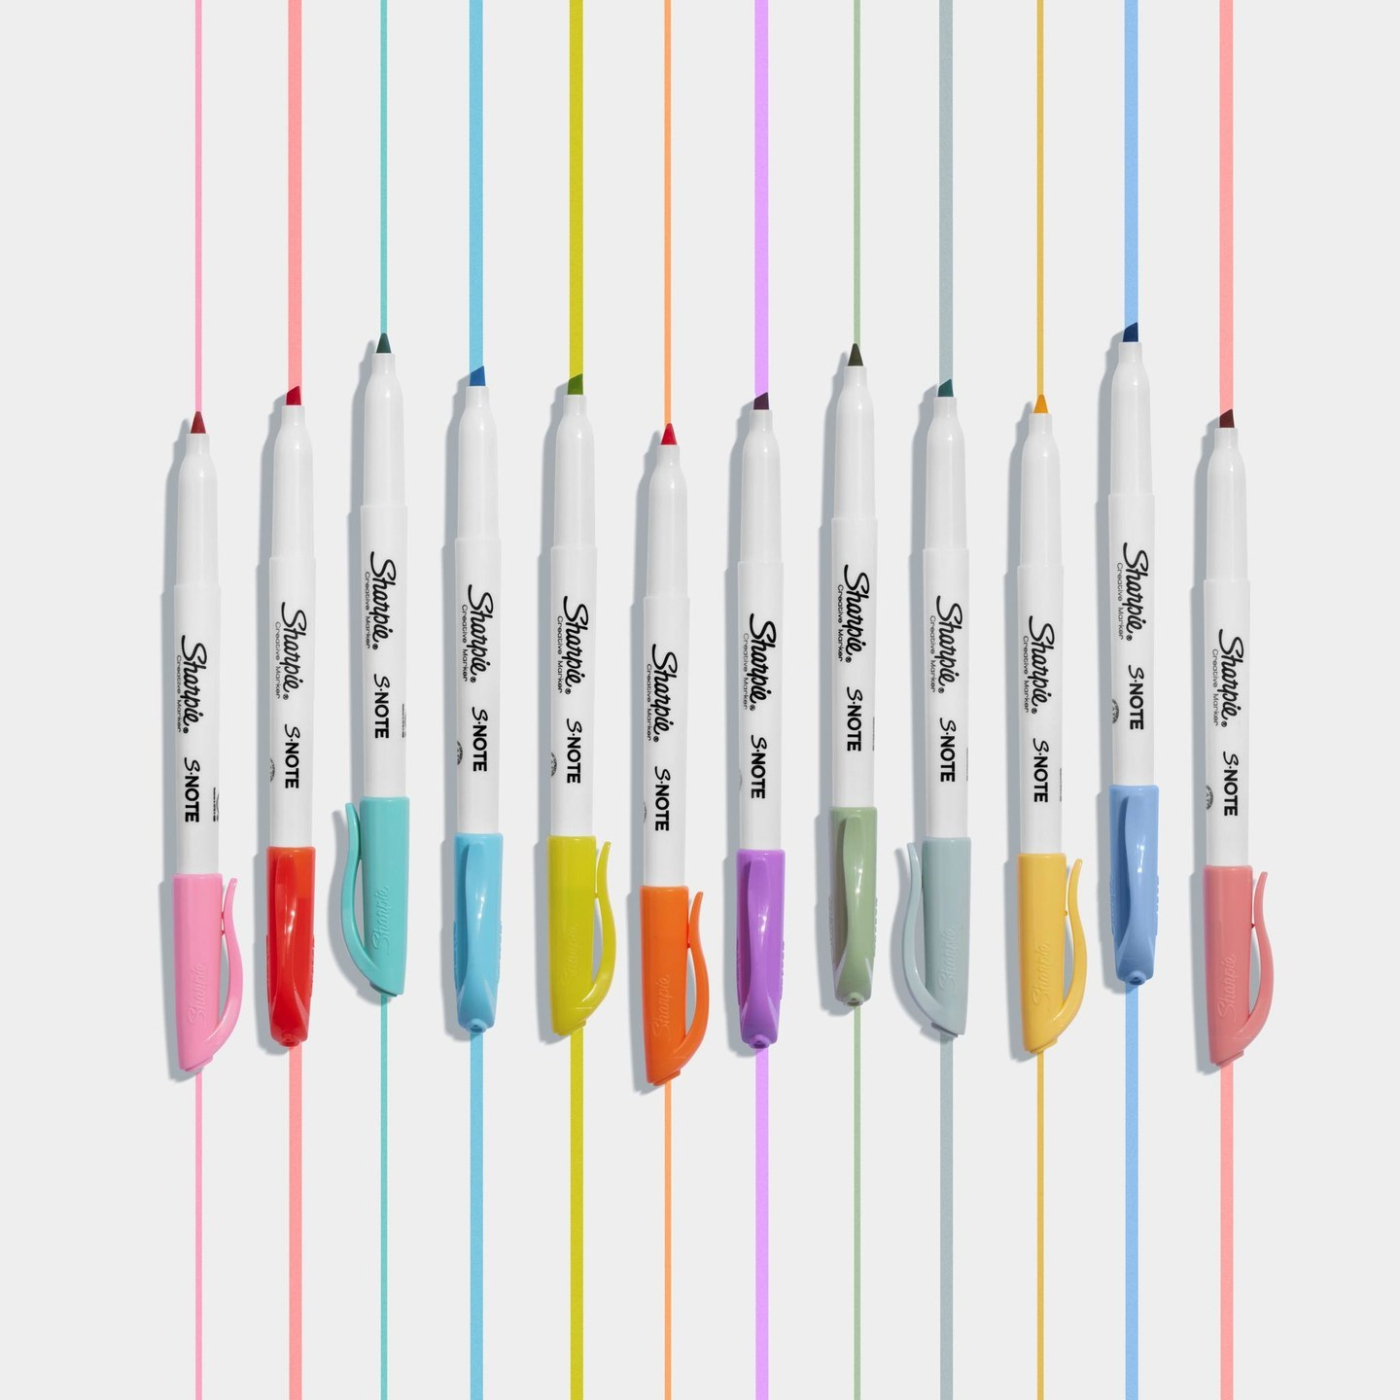 Sharpie S Note Markers - Assorted Colours (Blister of 12